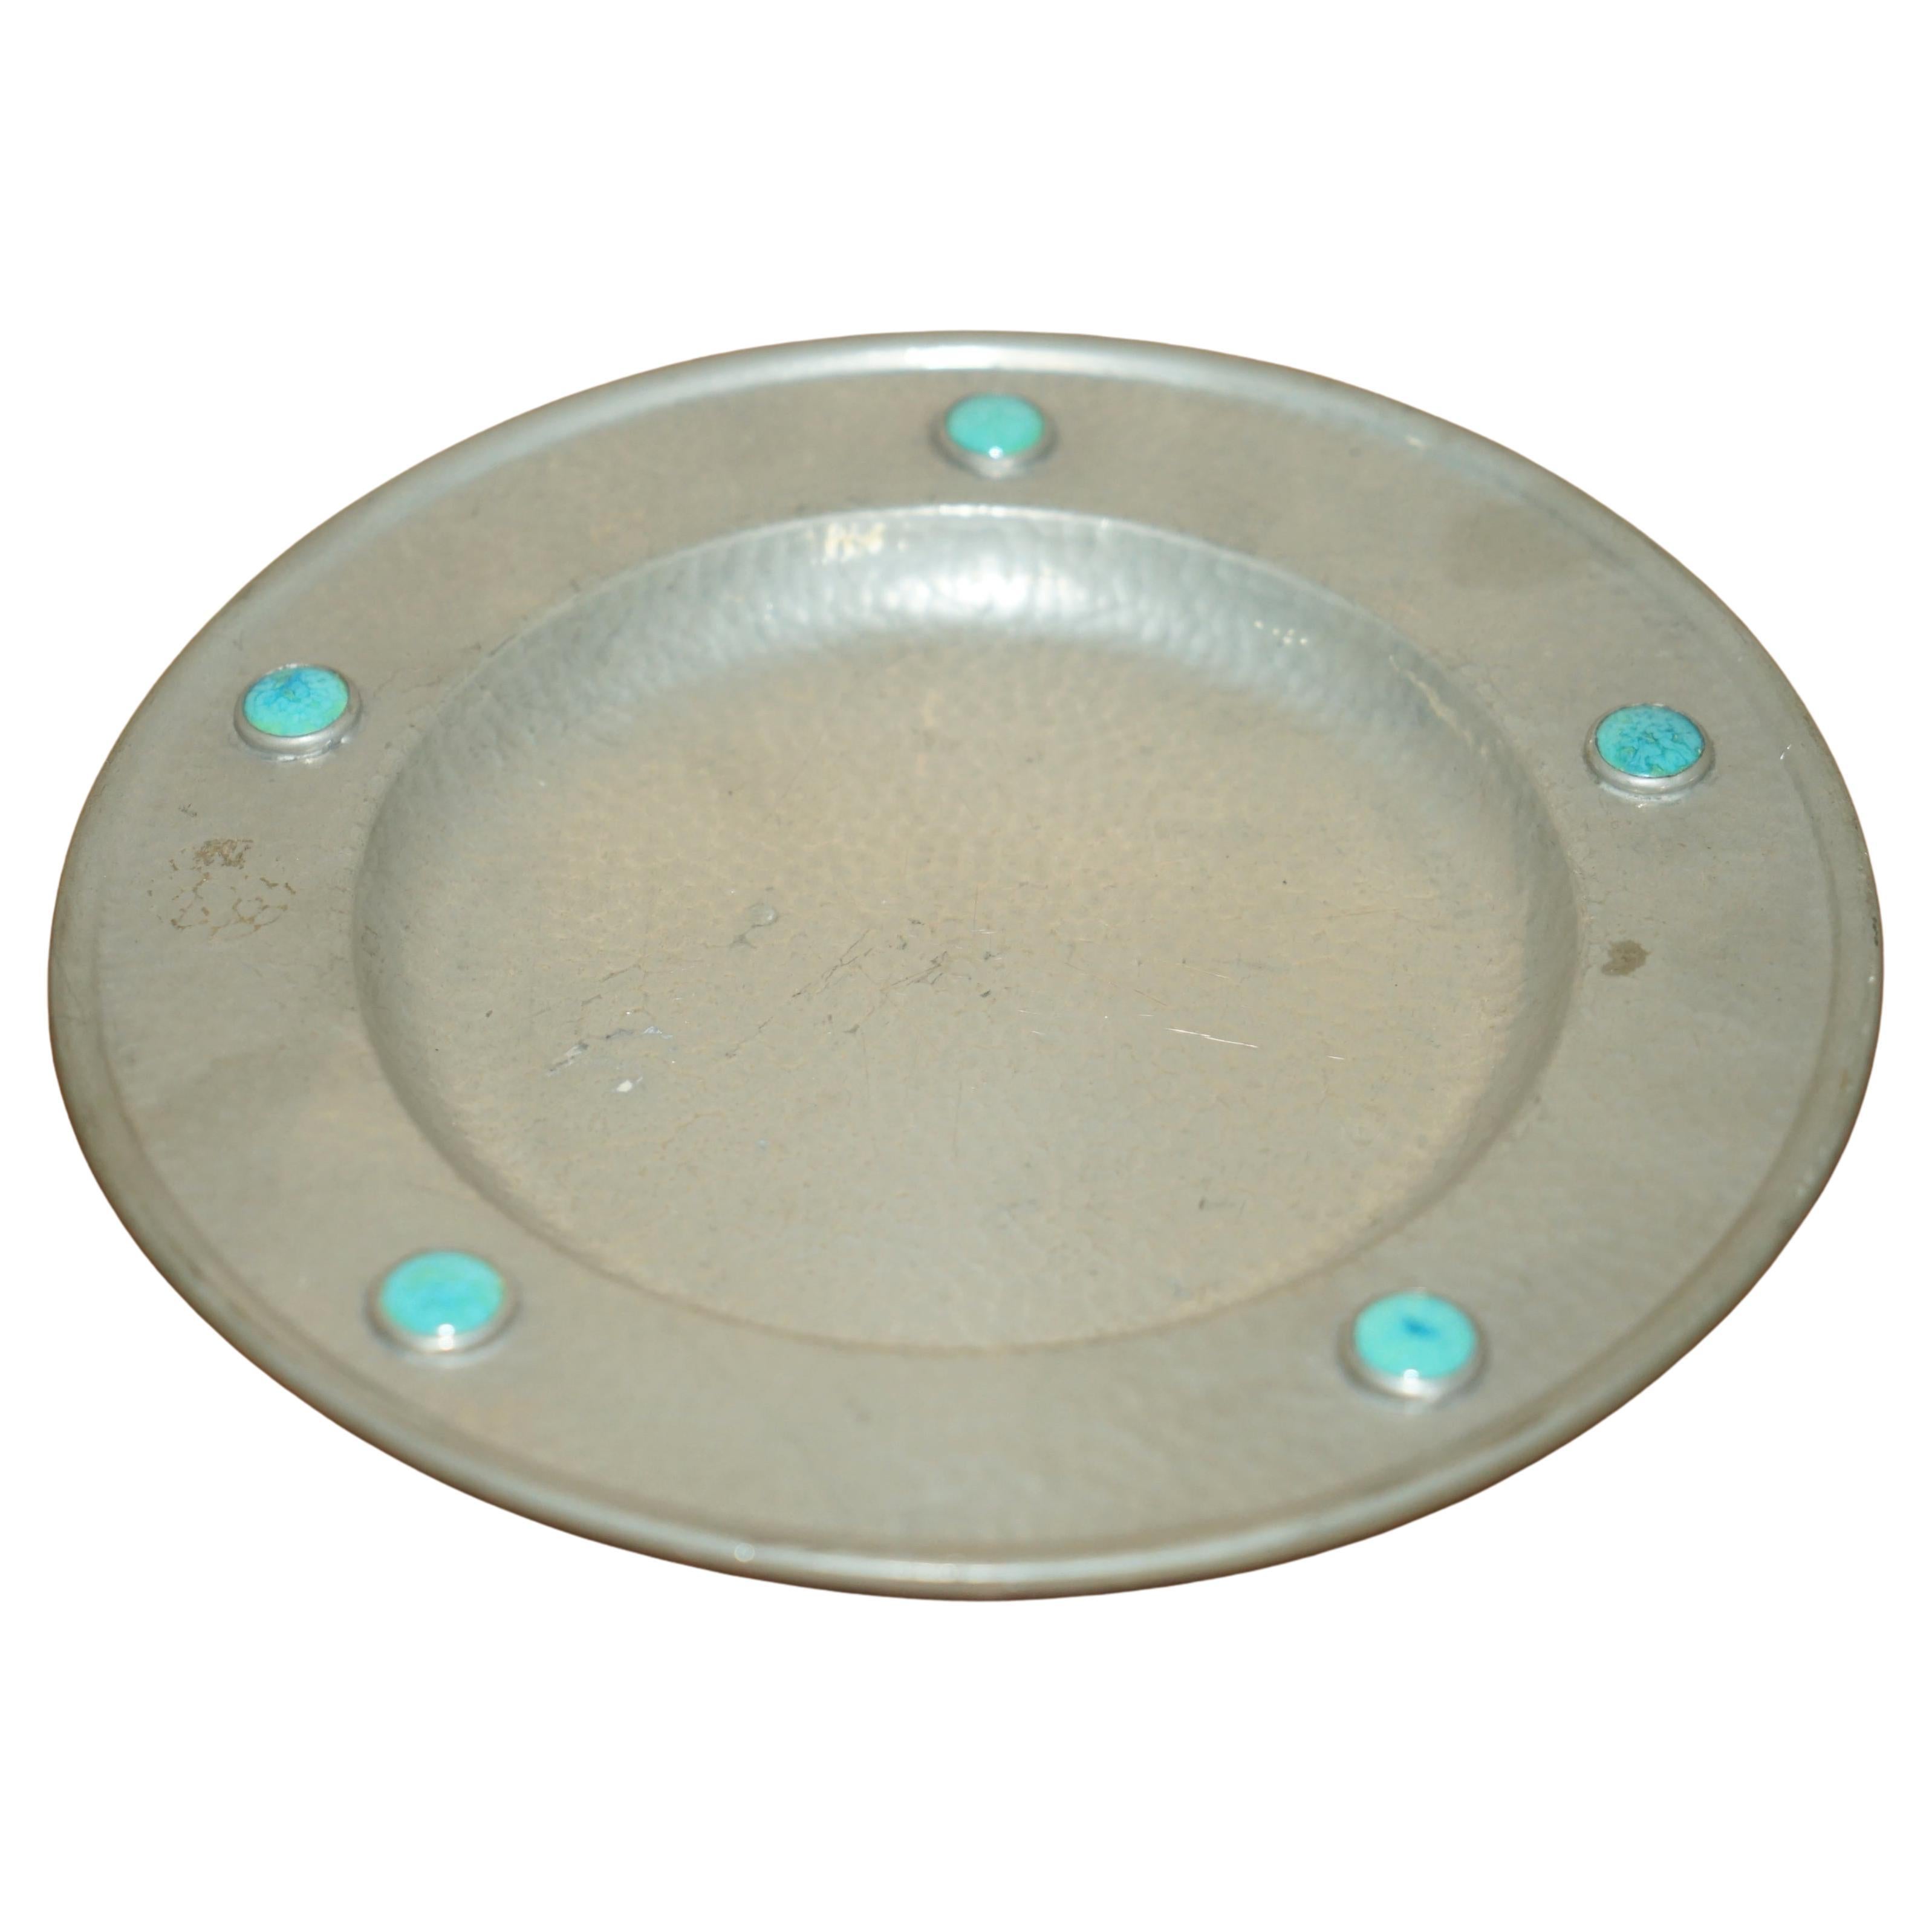 LOVELY LIBERTY'S LONDON STYLE ASHBERRY PEWTER PEWTER PLATE WITH CABOCHON STONEs For Sale